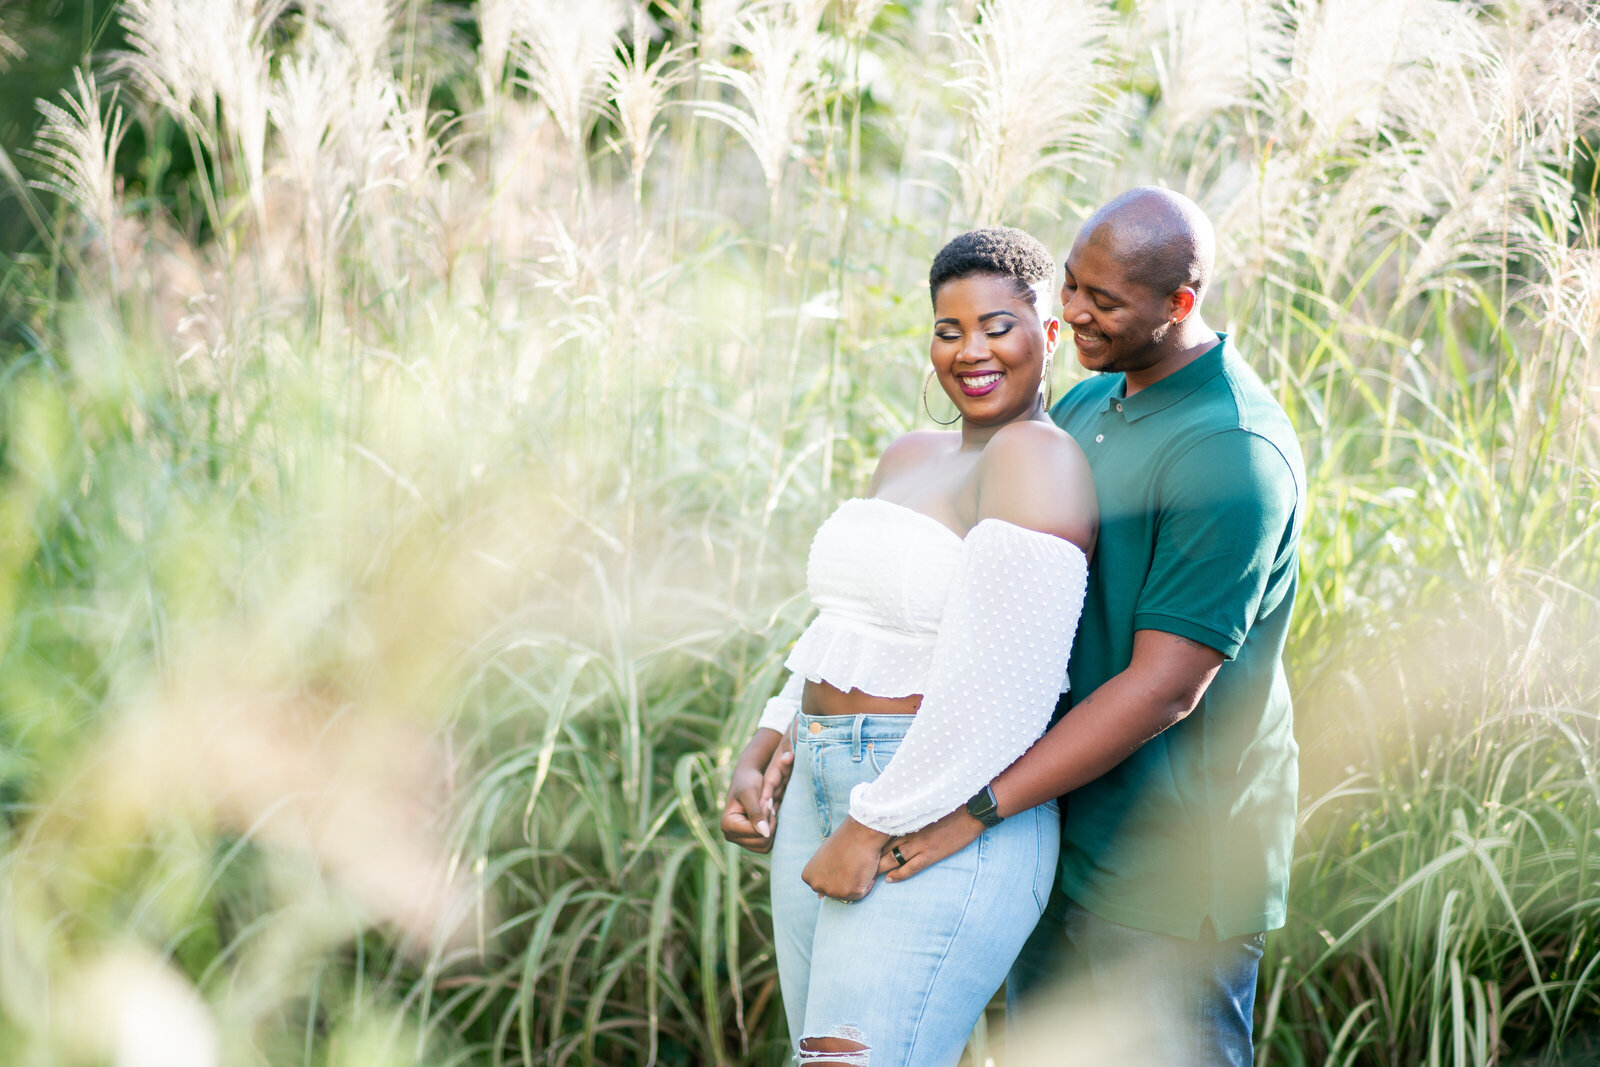 Fourth ward park engagement session